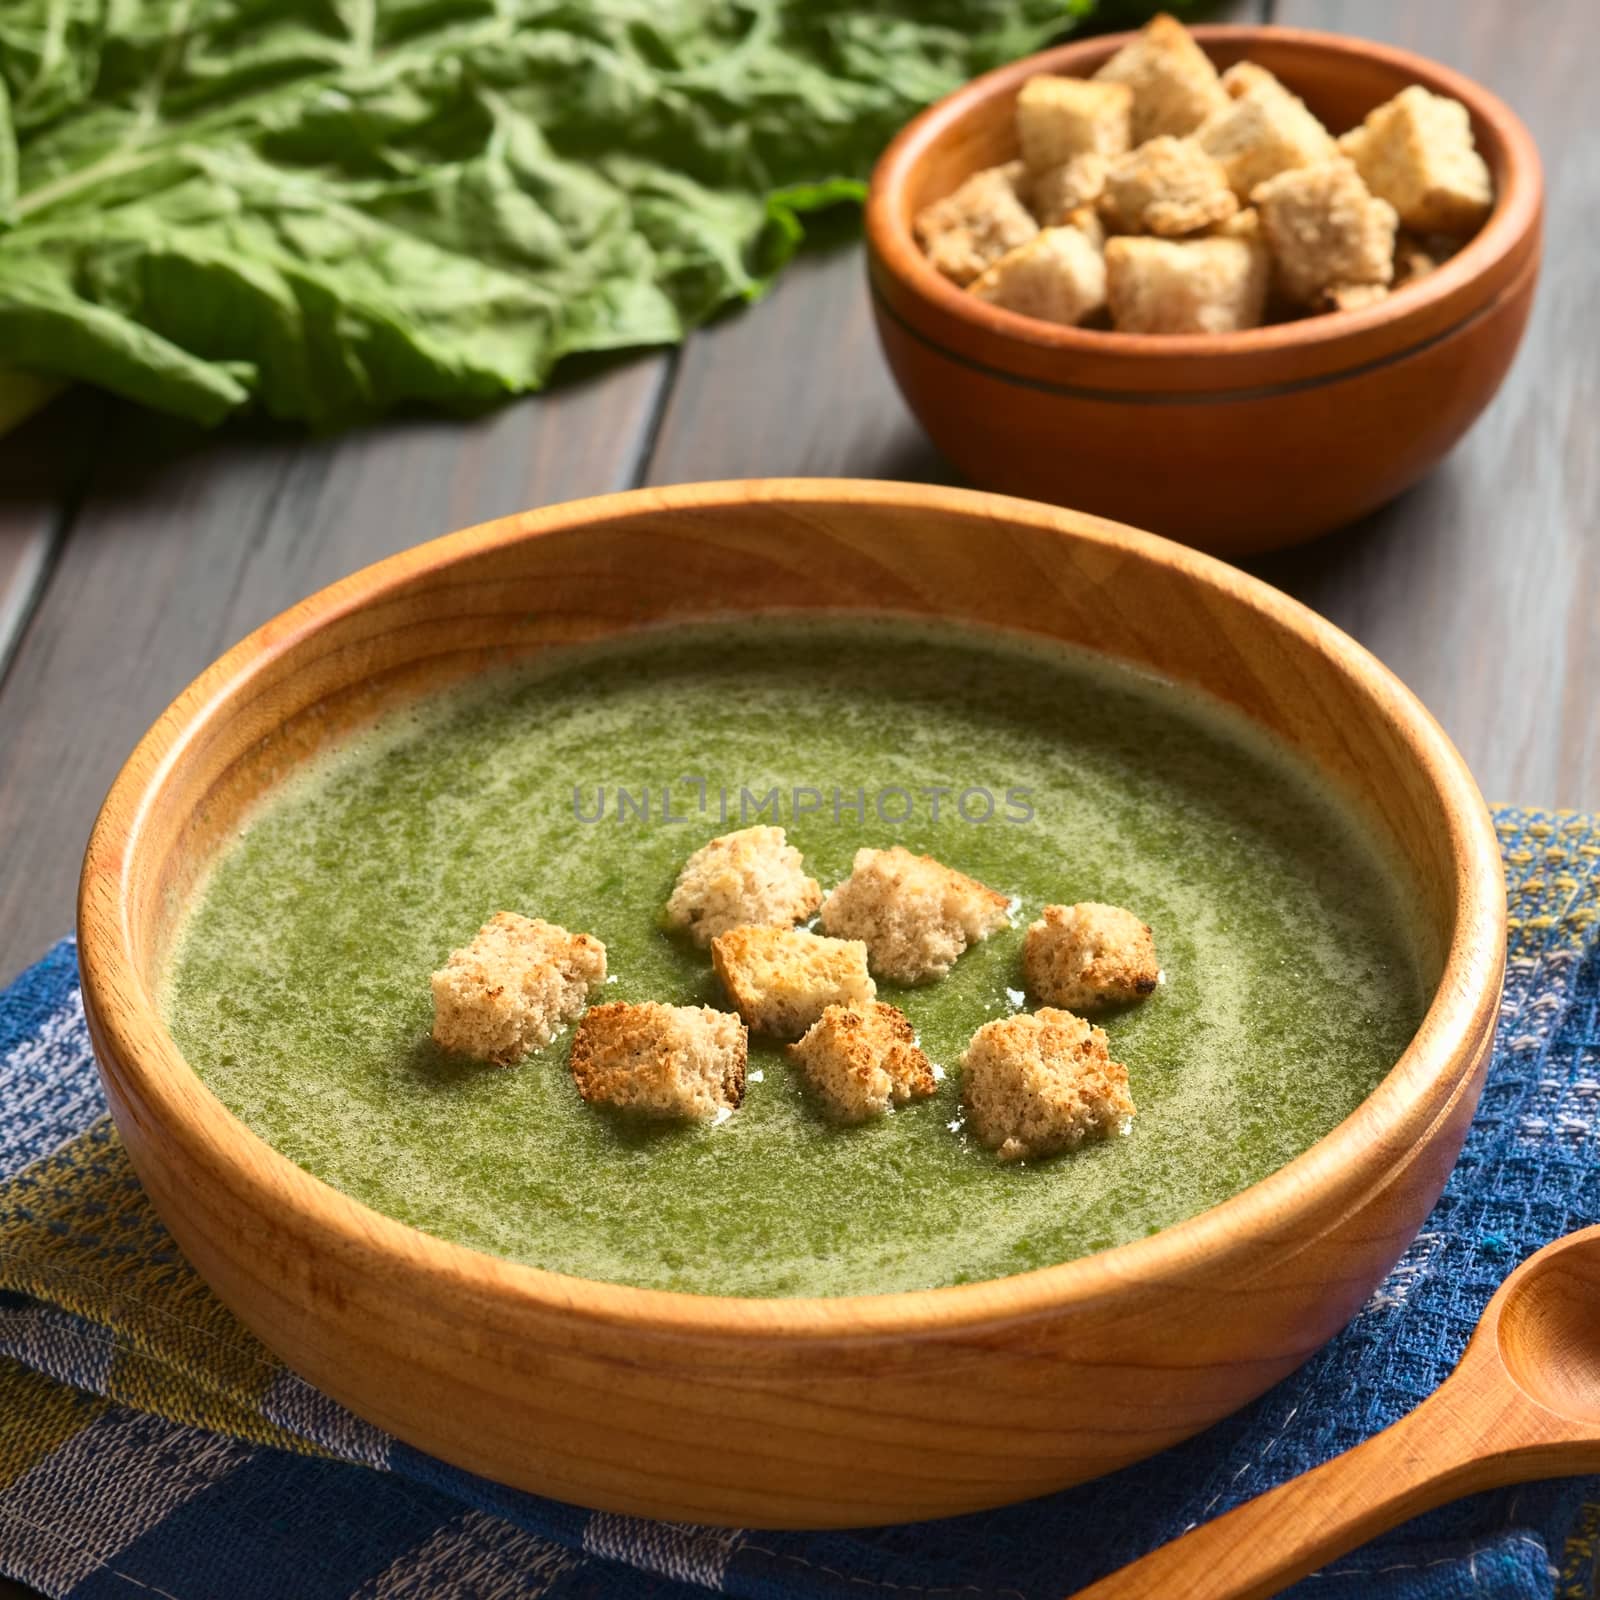 Cream of Chard Soup with Croutons by ildi